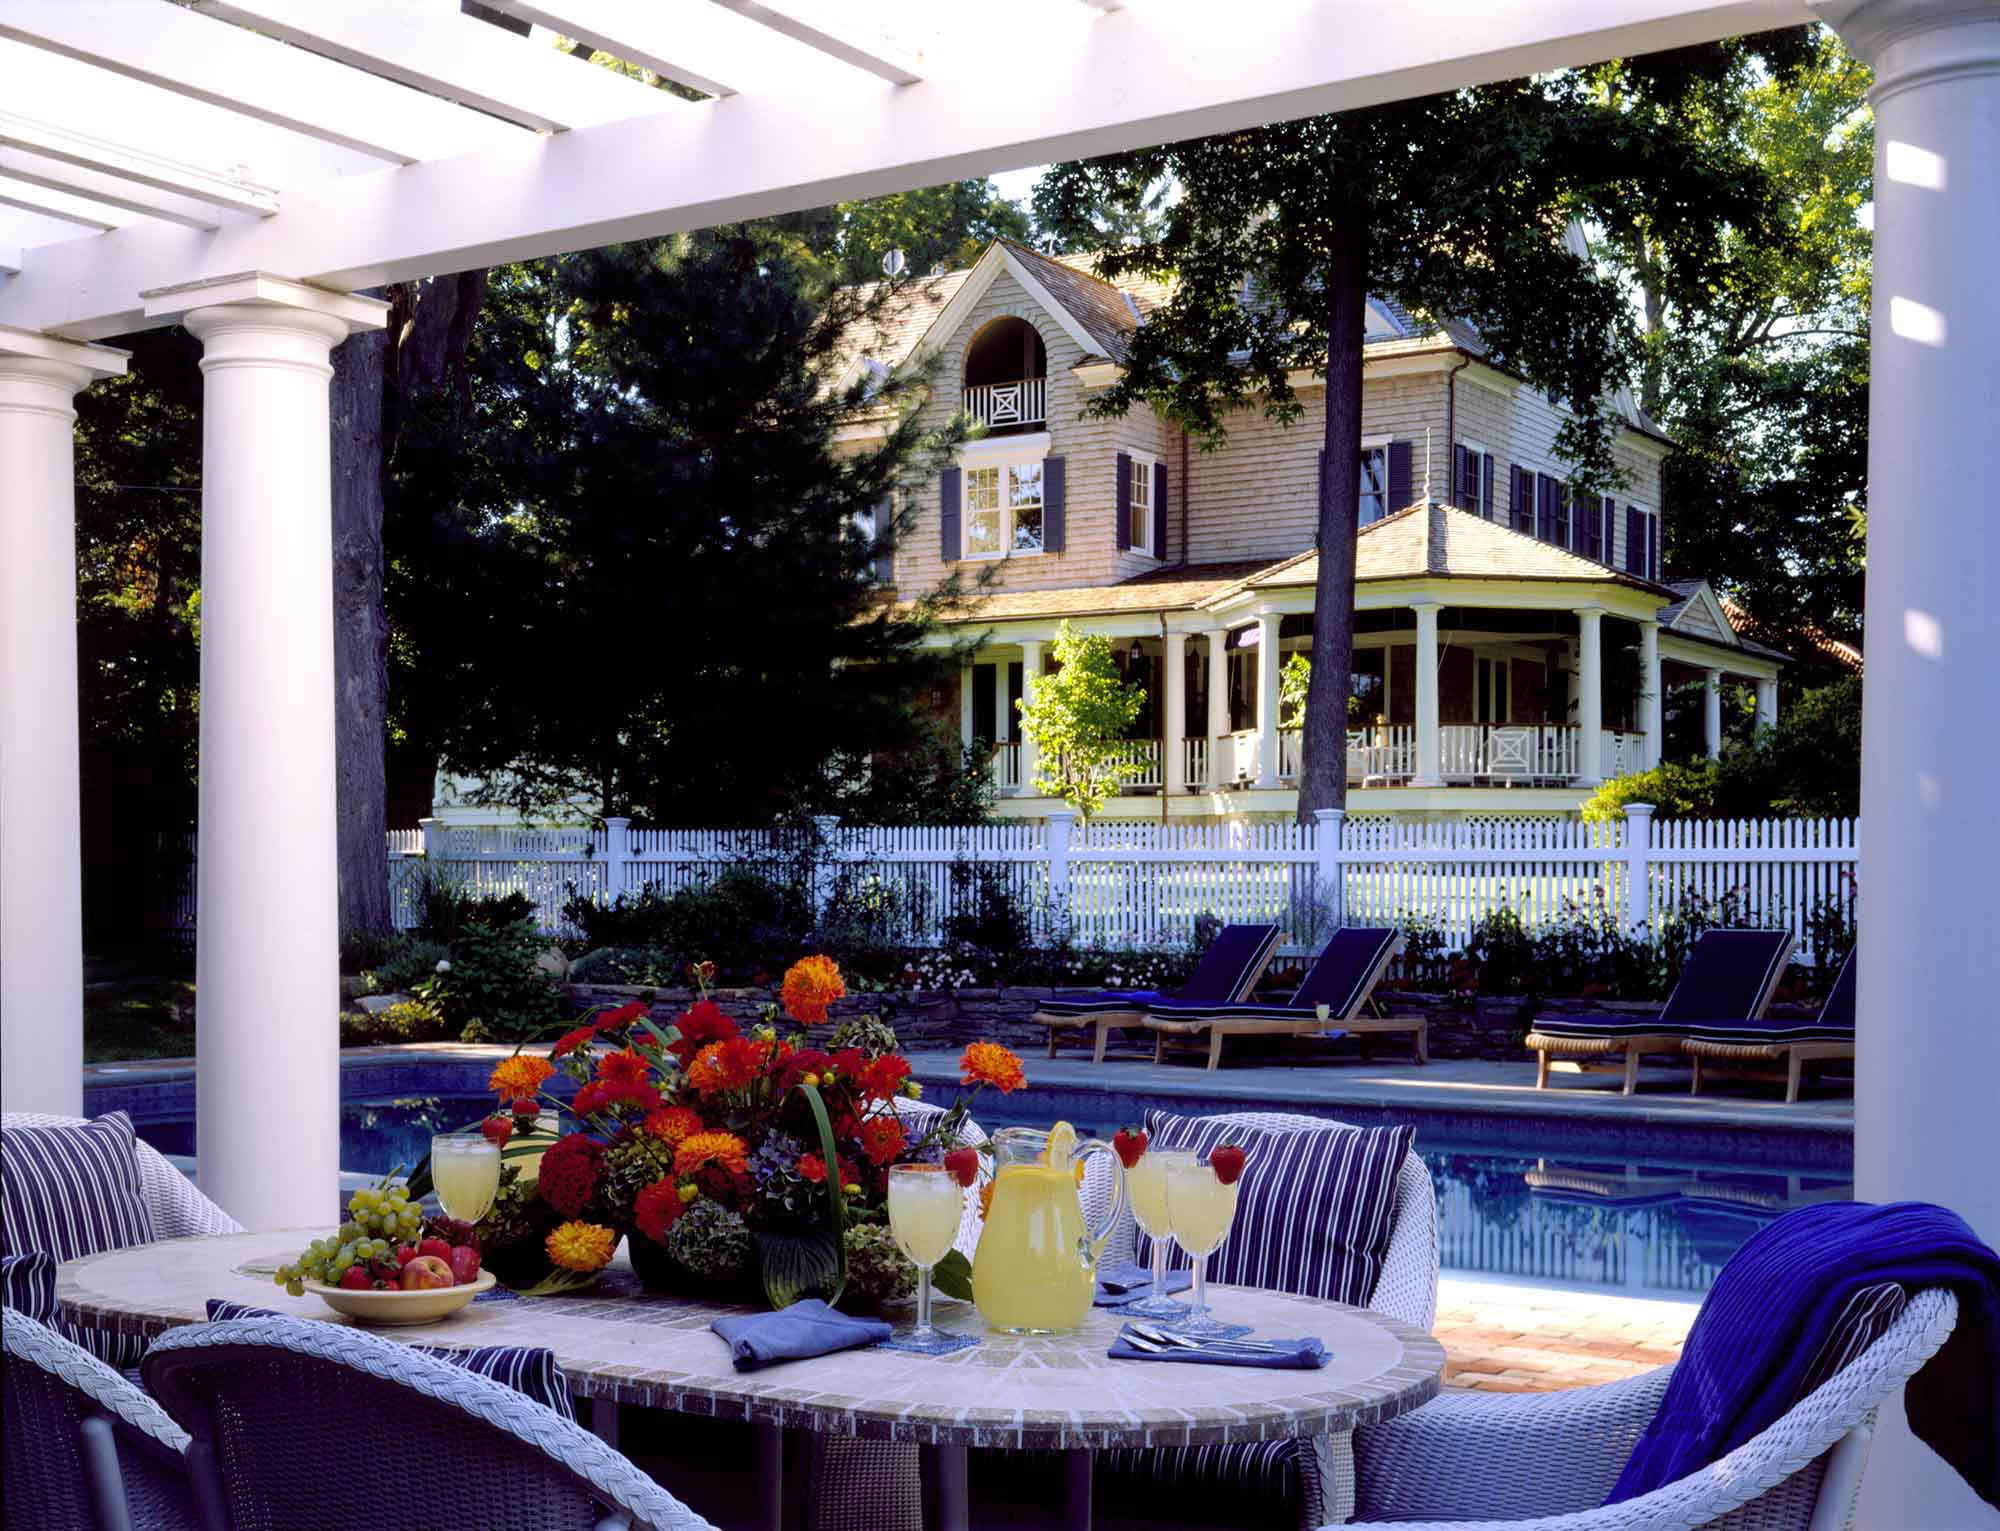 Shingle, Old Westbury, Long Island, pool, pool house, trellace, outdoor dining, wrap around porch